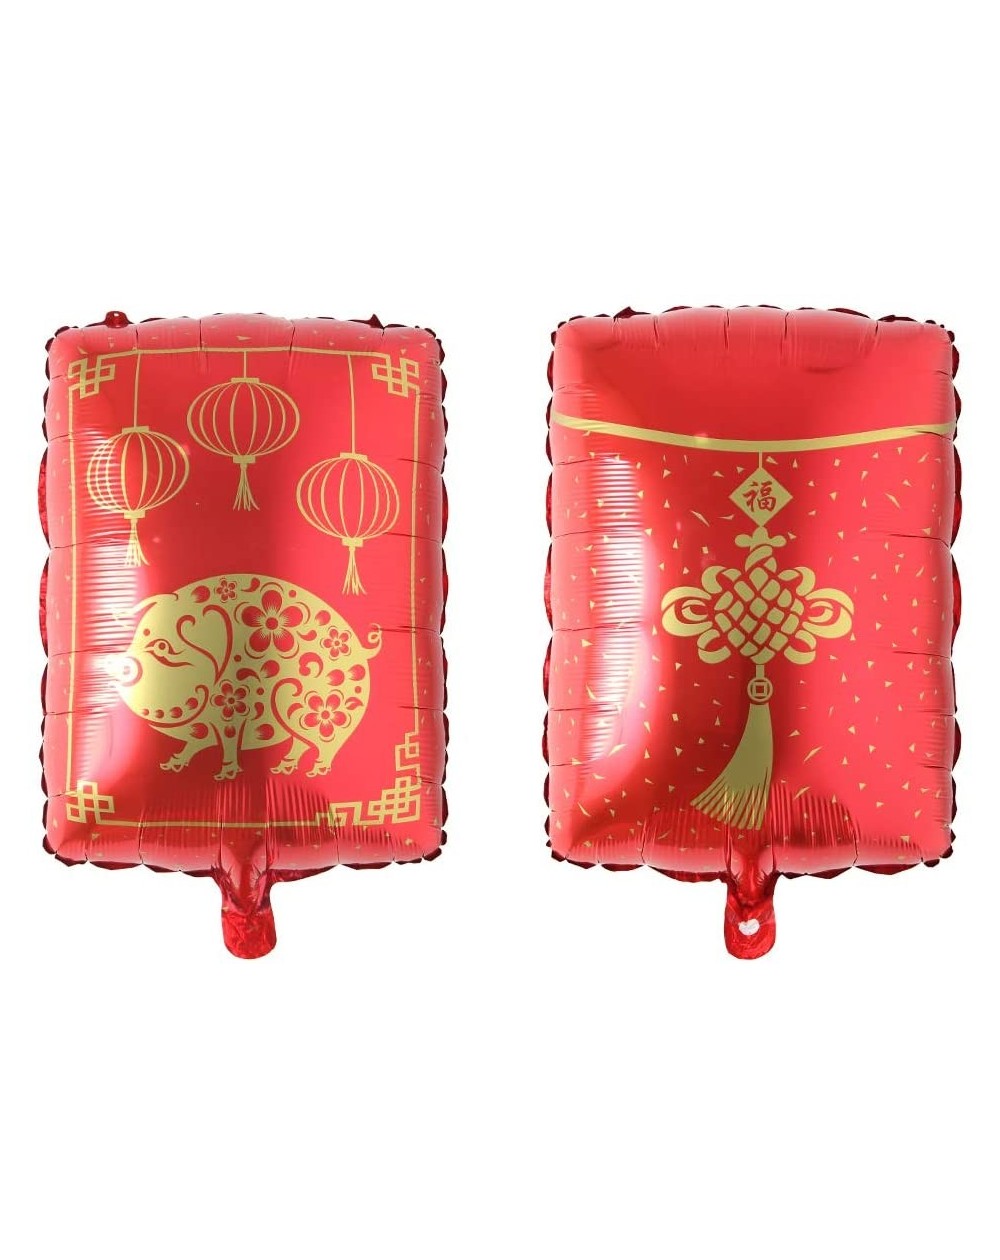 Balloons 2020 Chinese red Bag Happy New Year Firecracker red Envelope Helium Balloons Party Decoration Foil Balloons Party Su...